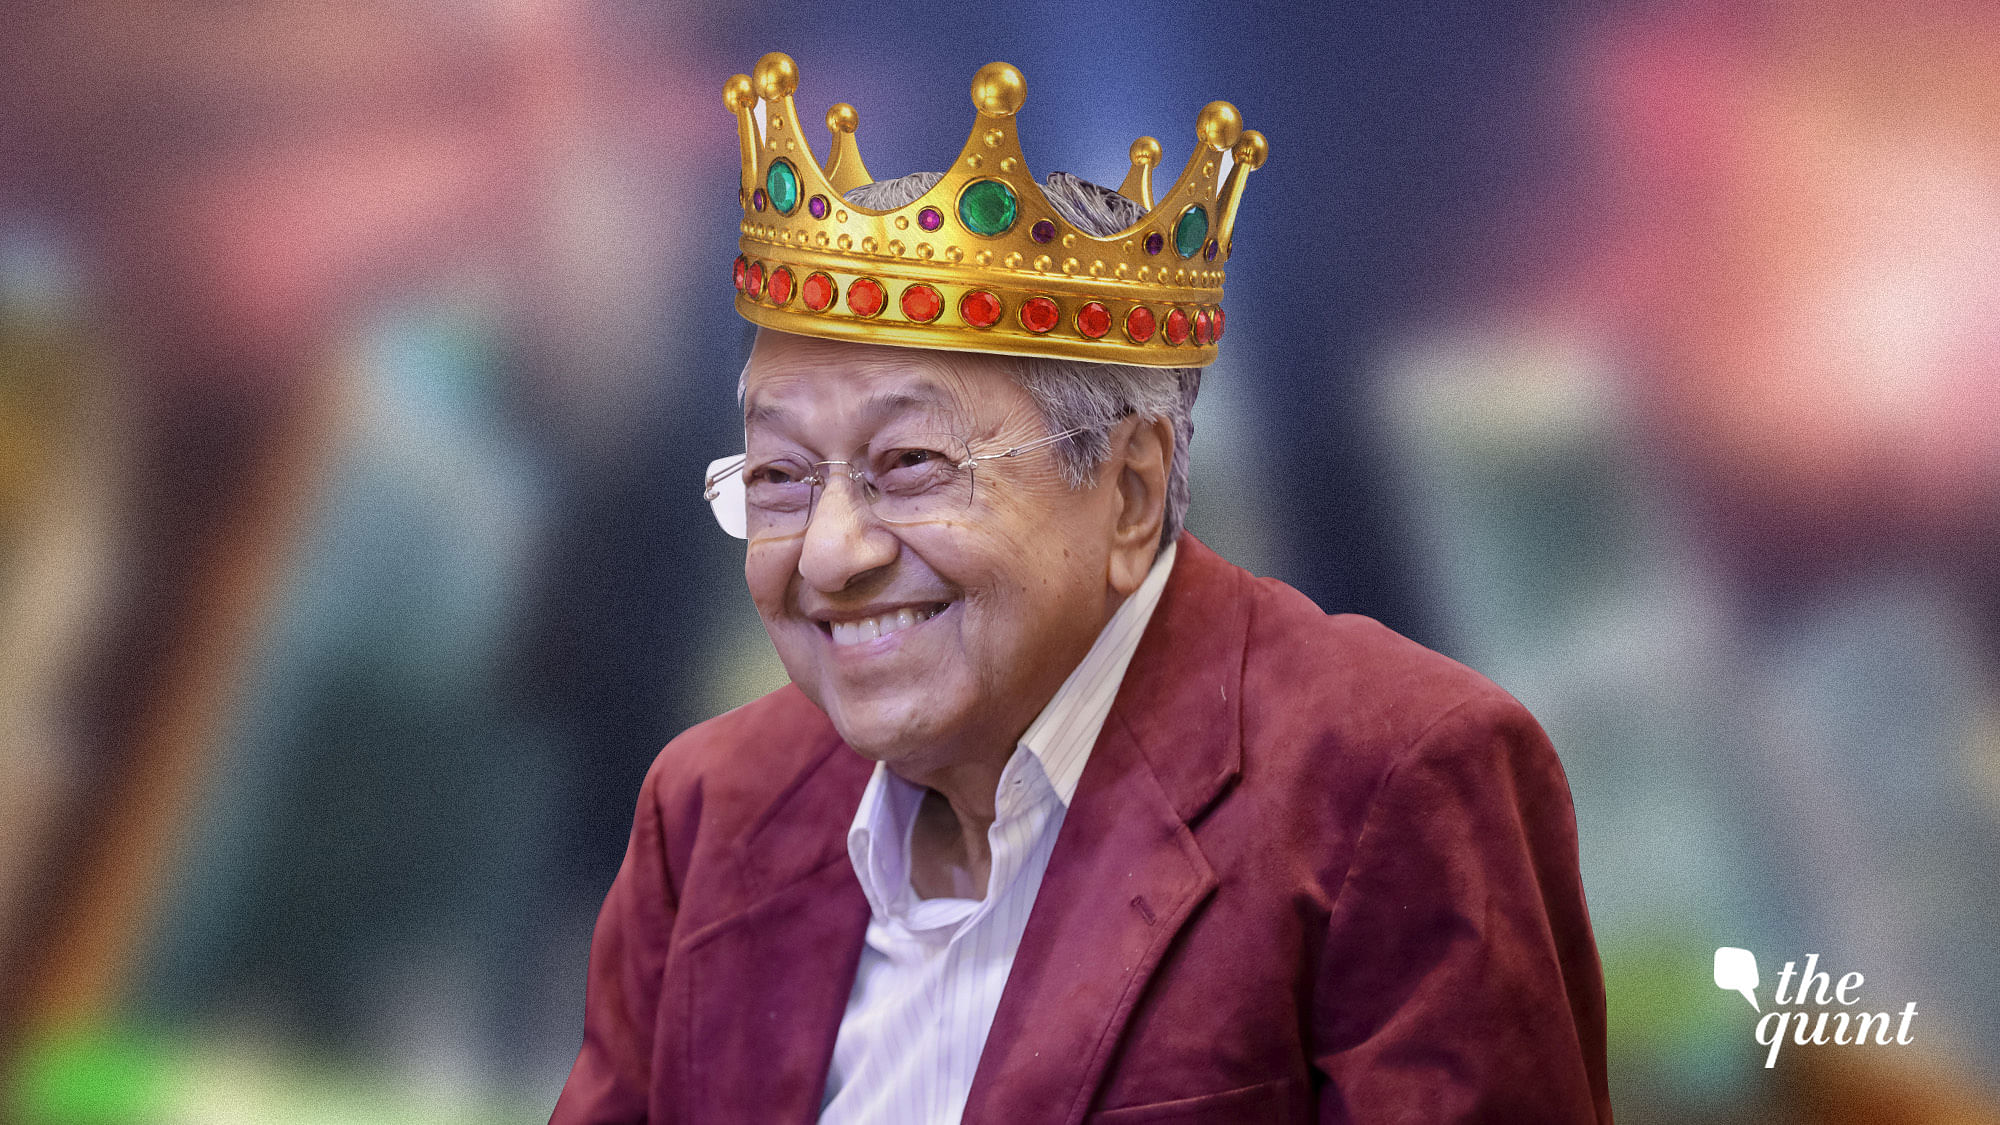 92-year-old Mahathir Mohammed is also the world’s oldest leader.